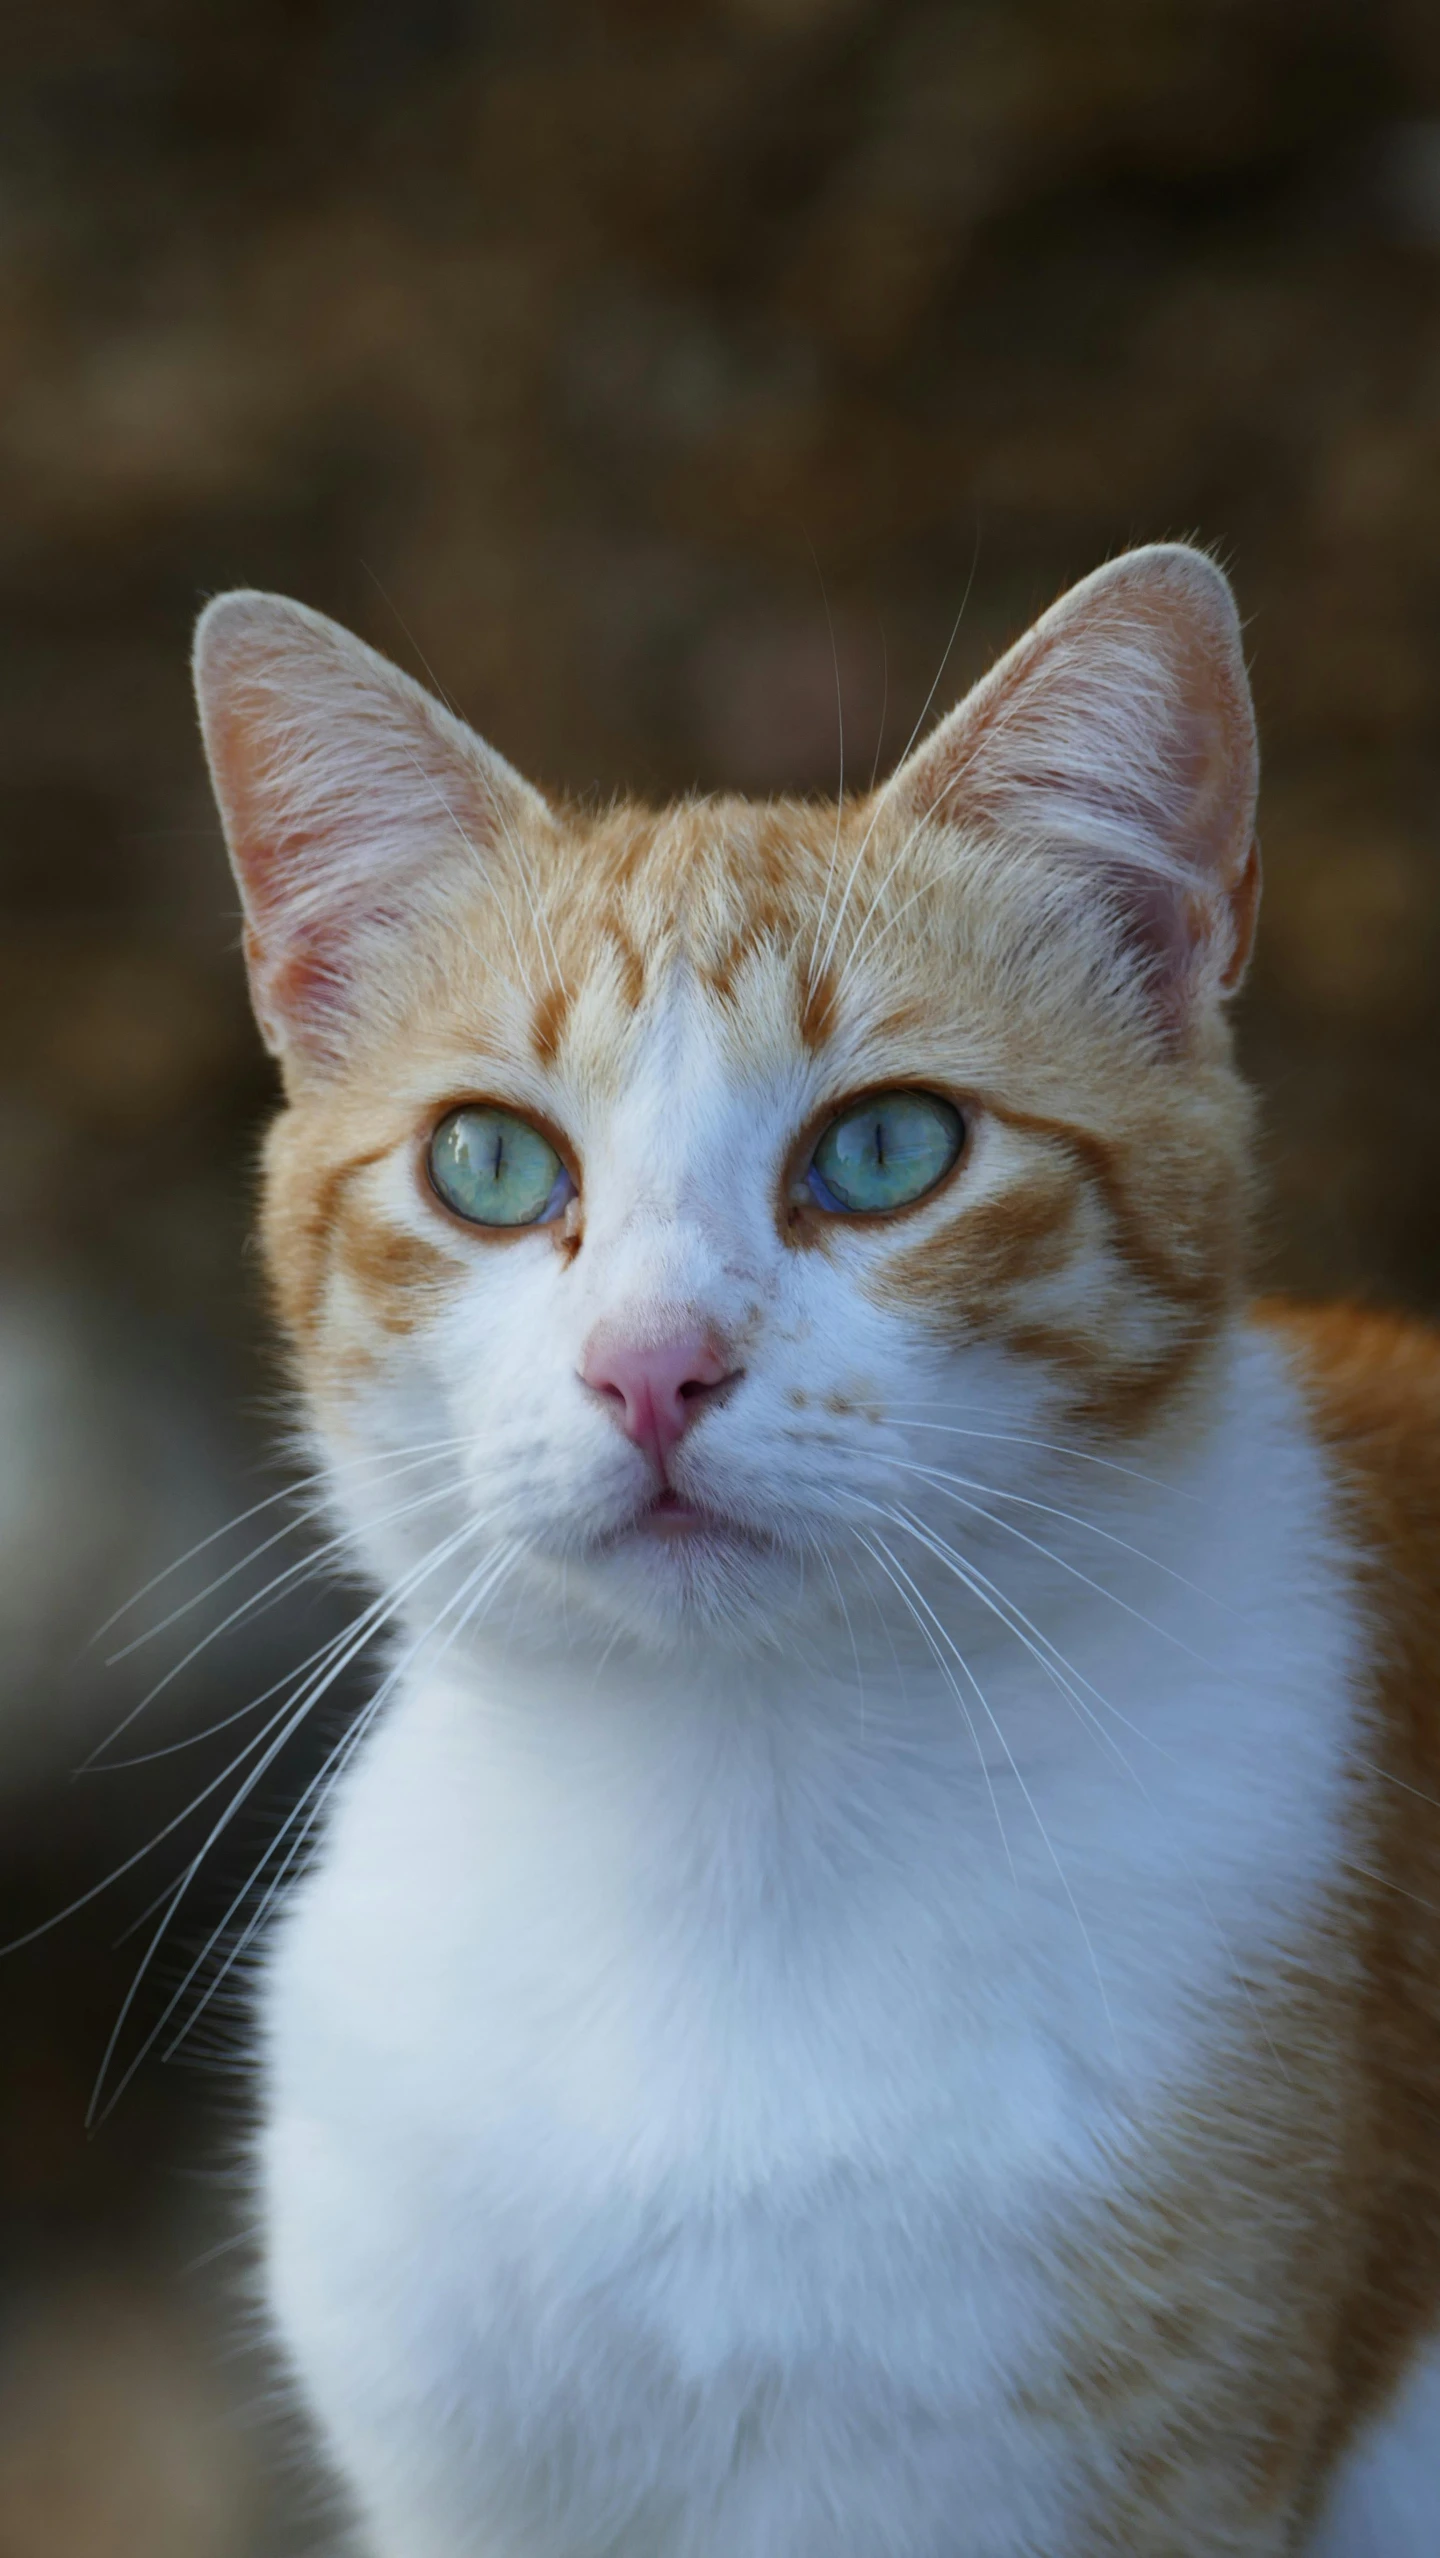 an orange and white cat is sitting and looking up